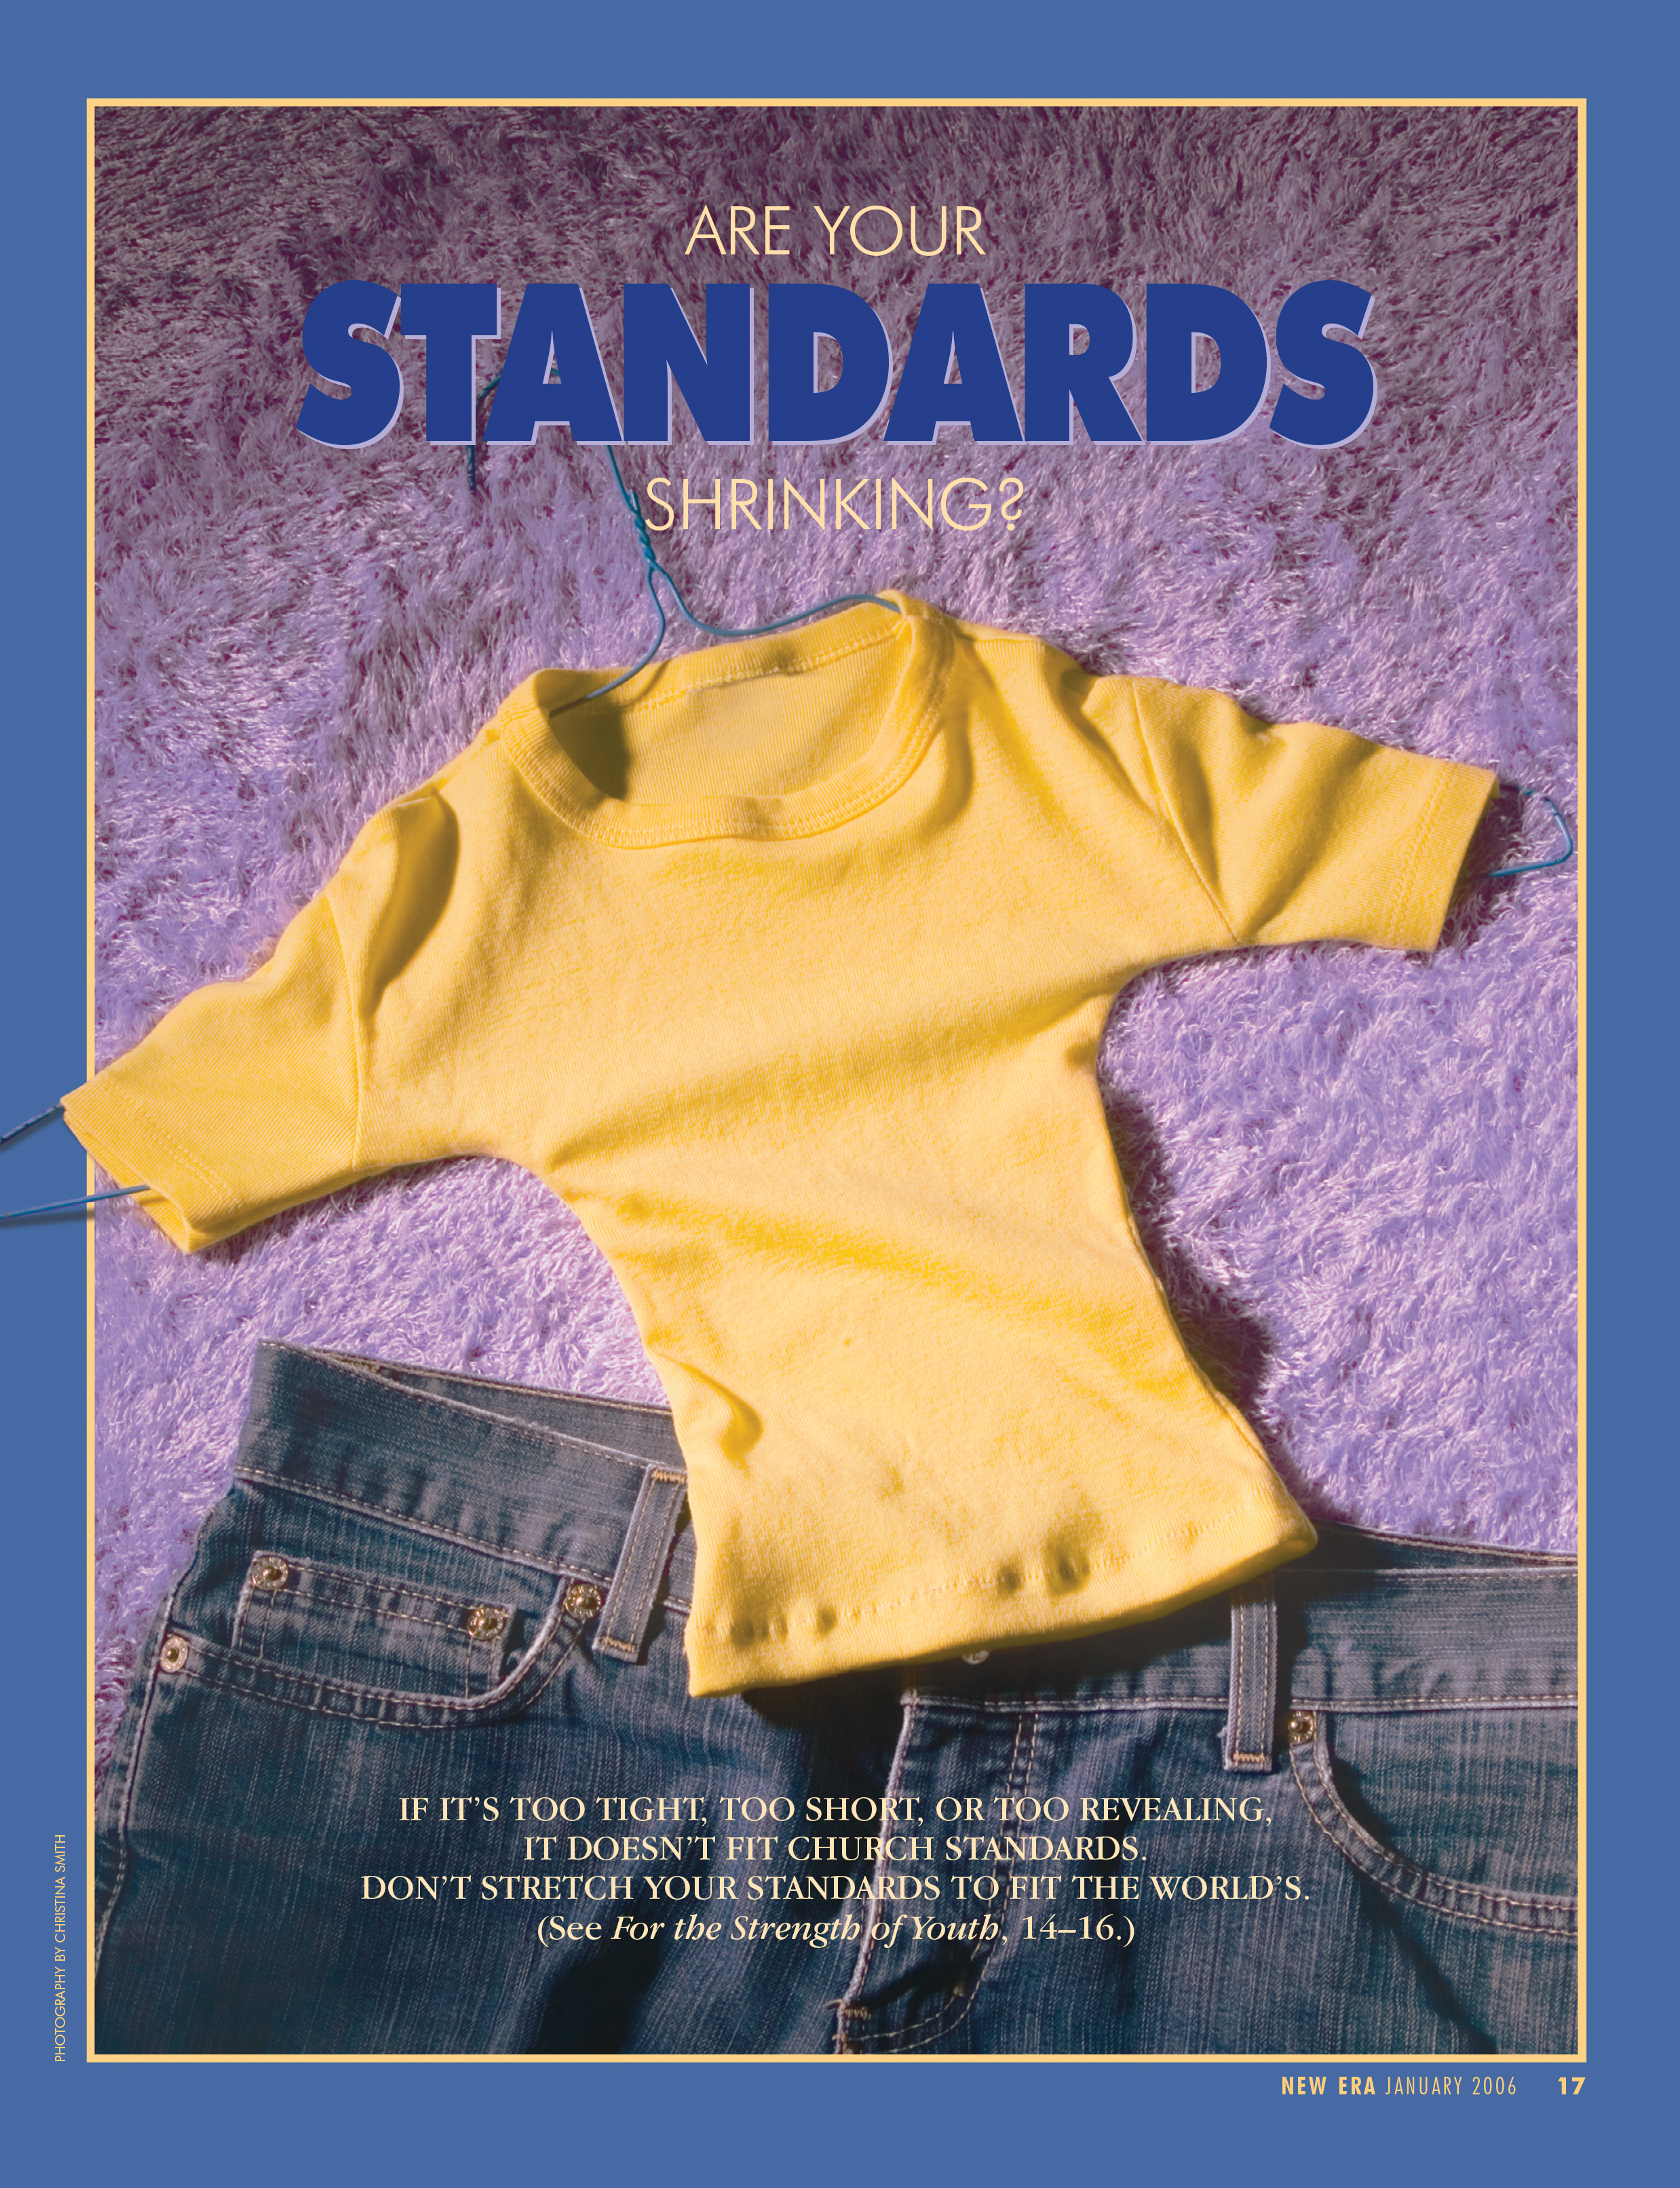 A conceptual photograph of an abnormally small shirt next to a normal pair of jeans, paired with the words “Are Your Standards Shrinking?”